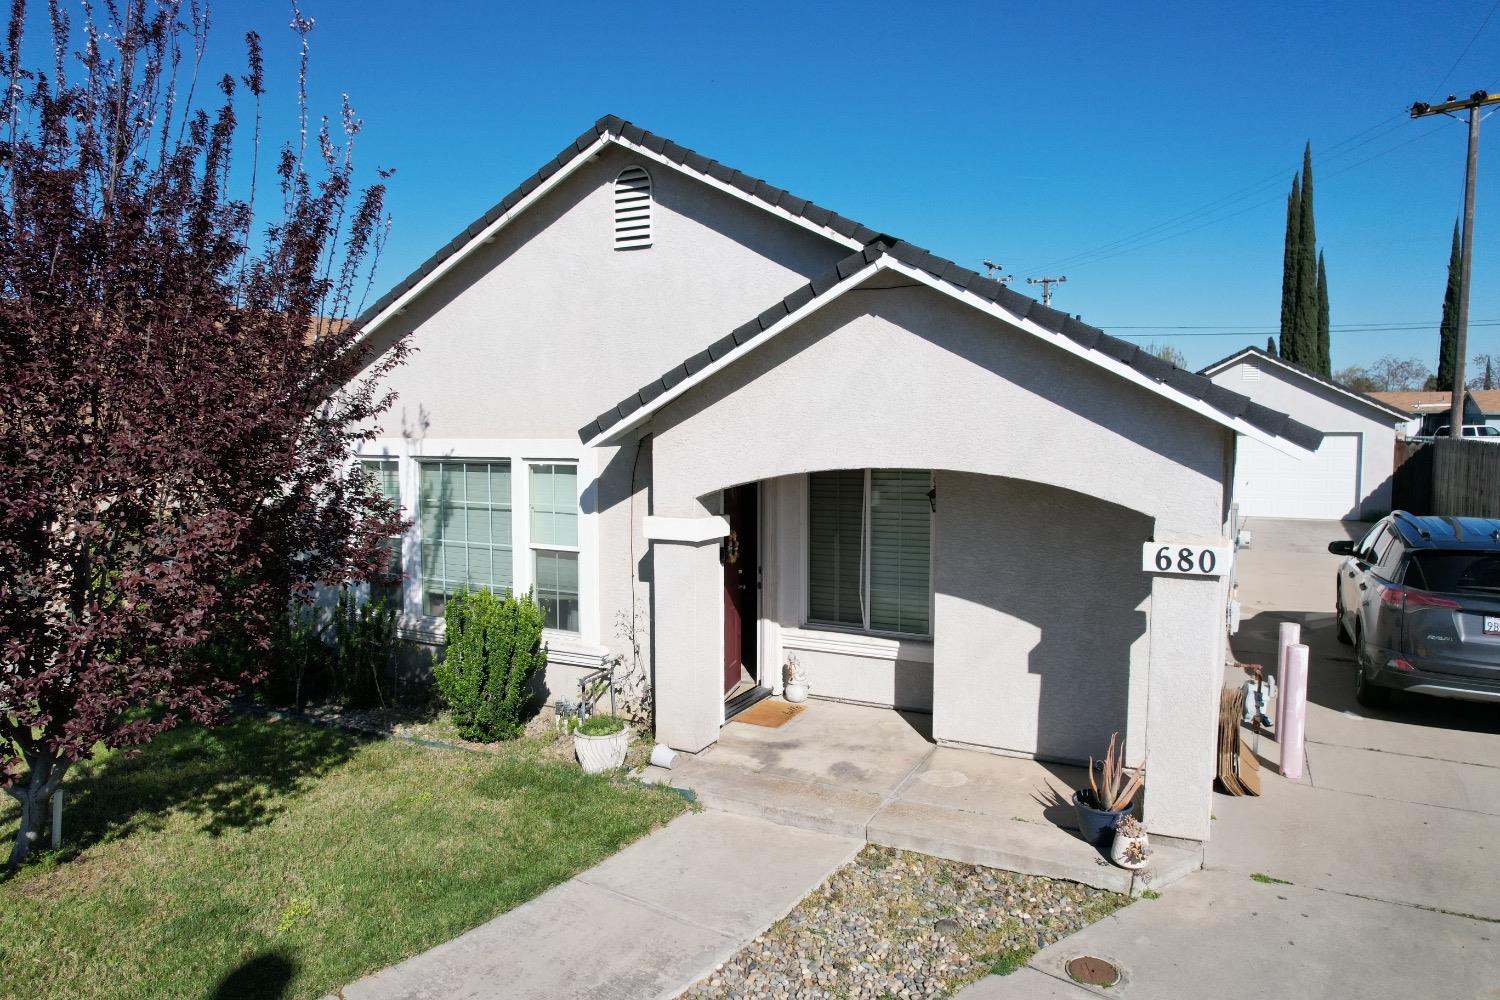 Photo of 680 San Joaquin Ct in Atwater, CA